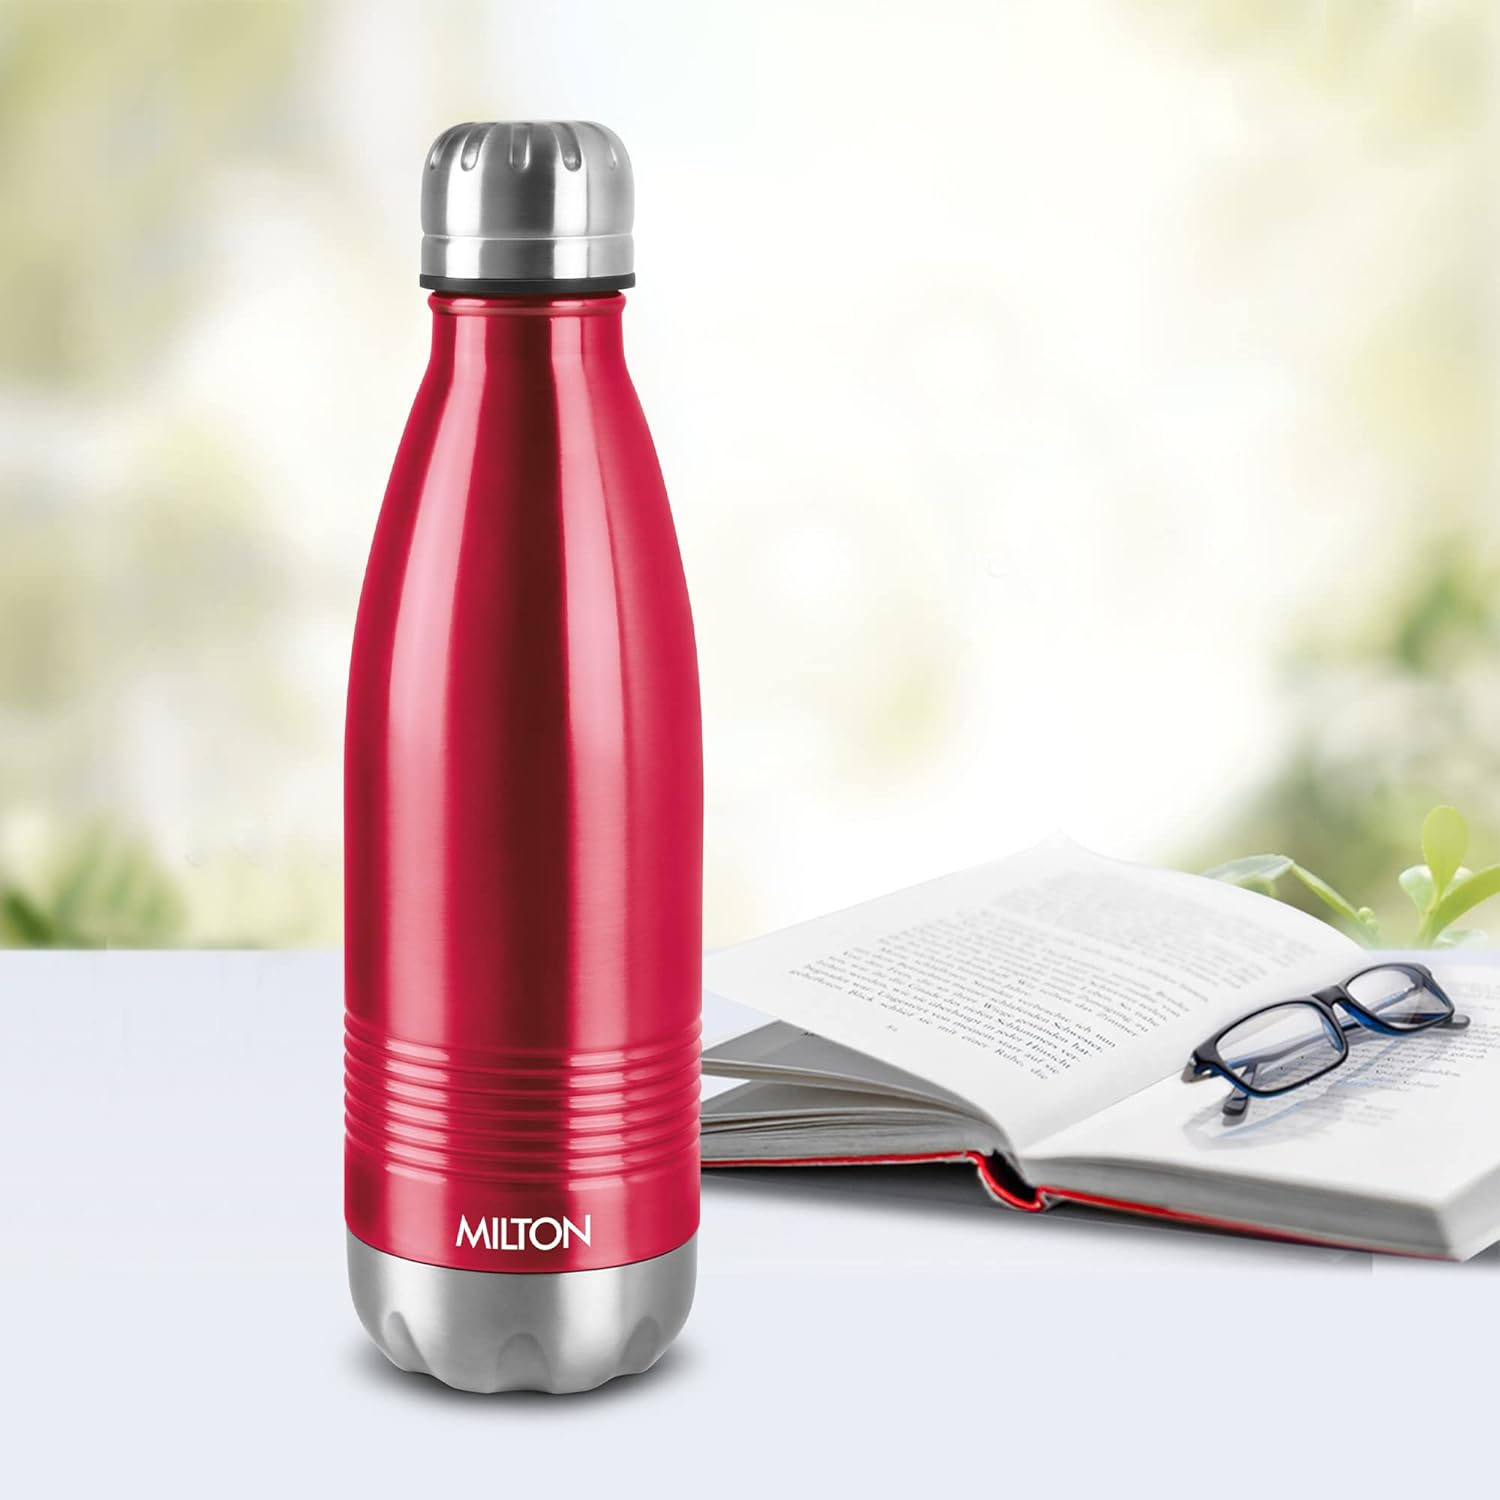 Milton Duo Deluxe-750 Thermosteel Bottle Hot & Cold Vacuum Insulated Water Tea Coffee Flask, 700 ML, Maroon